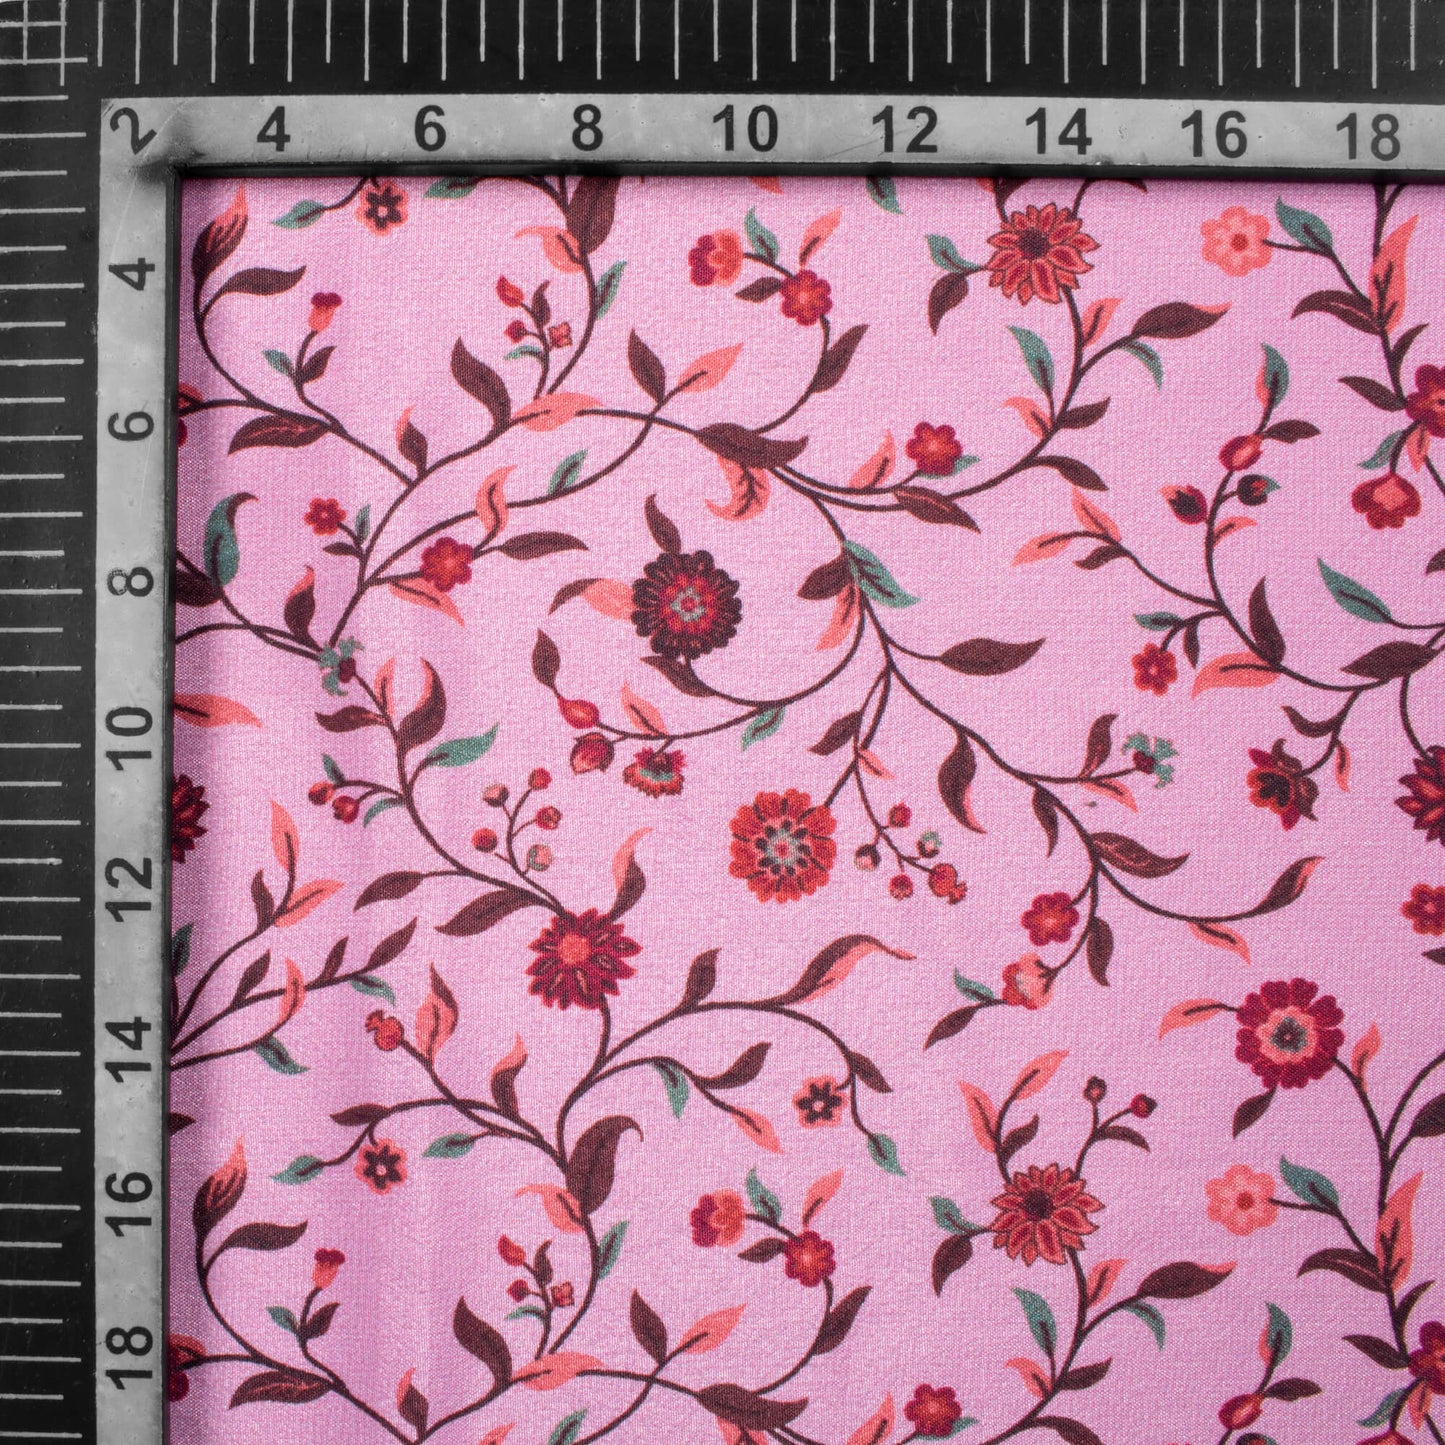 Carnation Pink And Maroon Floral Pattern Digital Print Crepe Silk Fabric